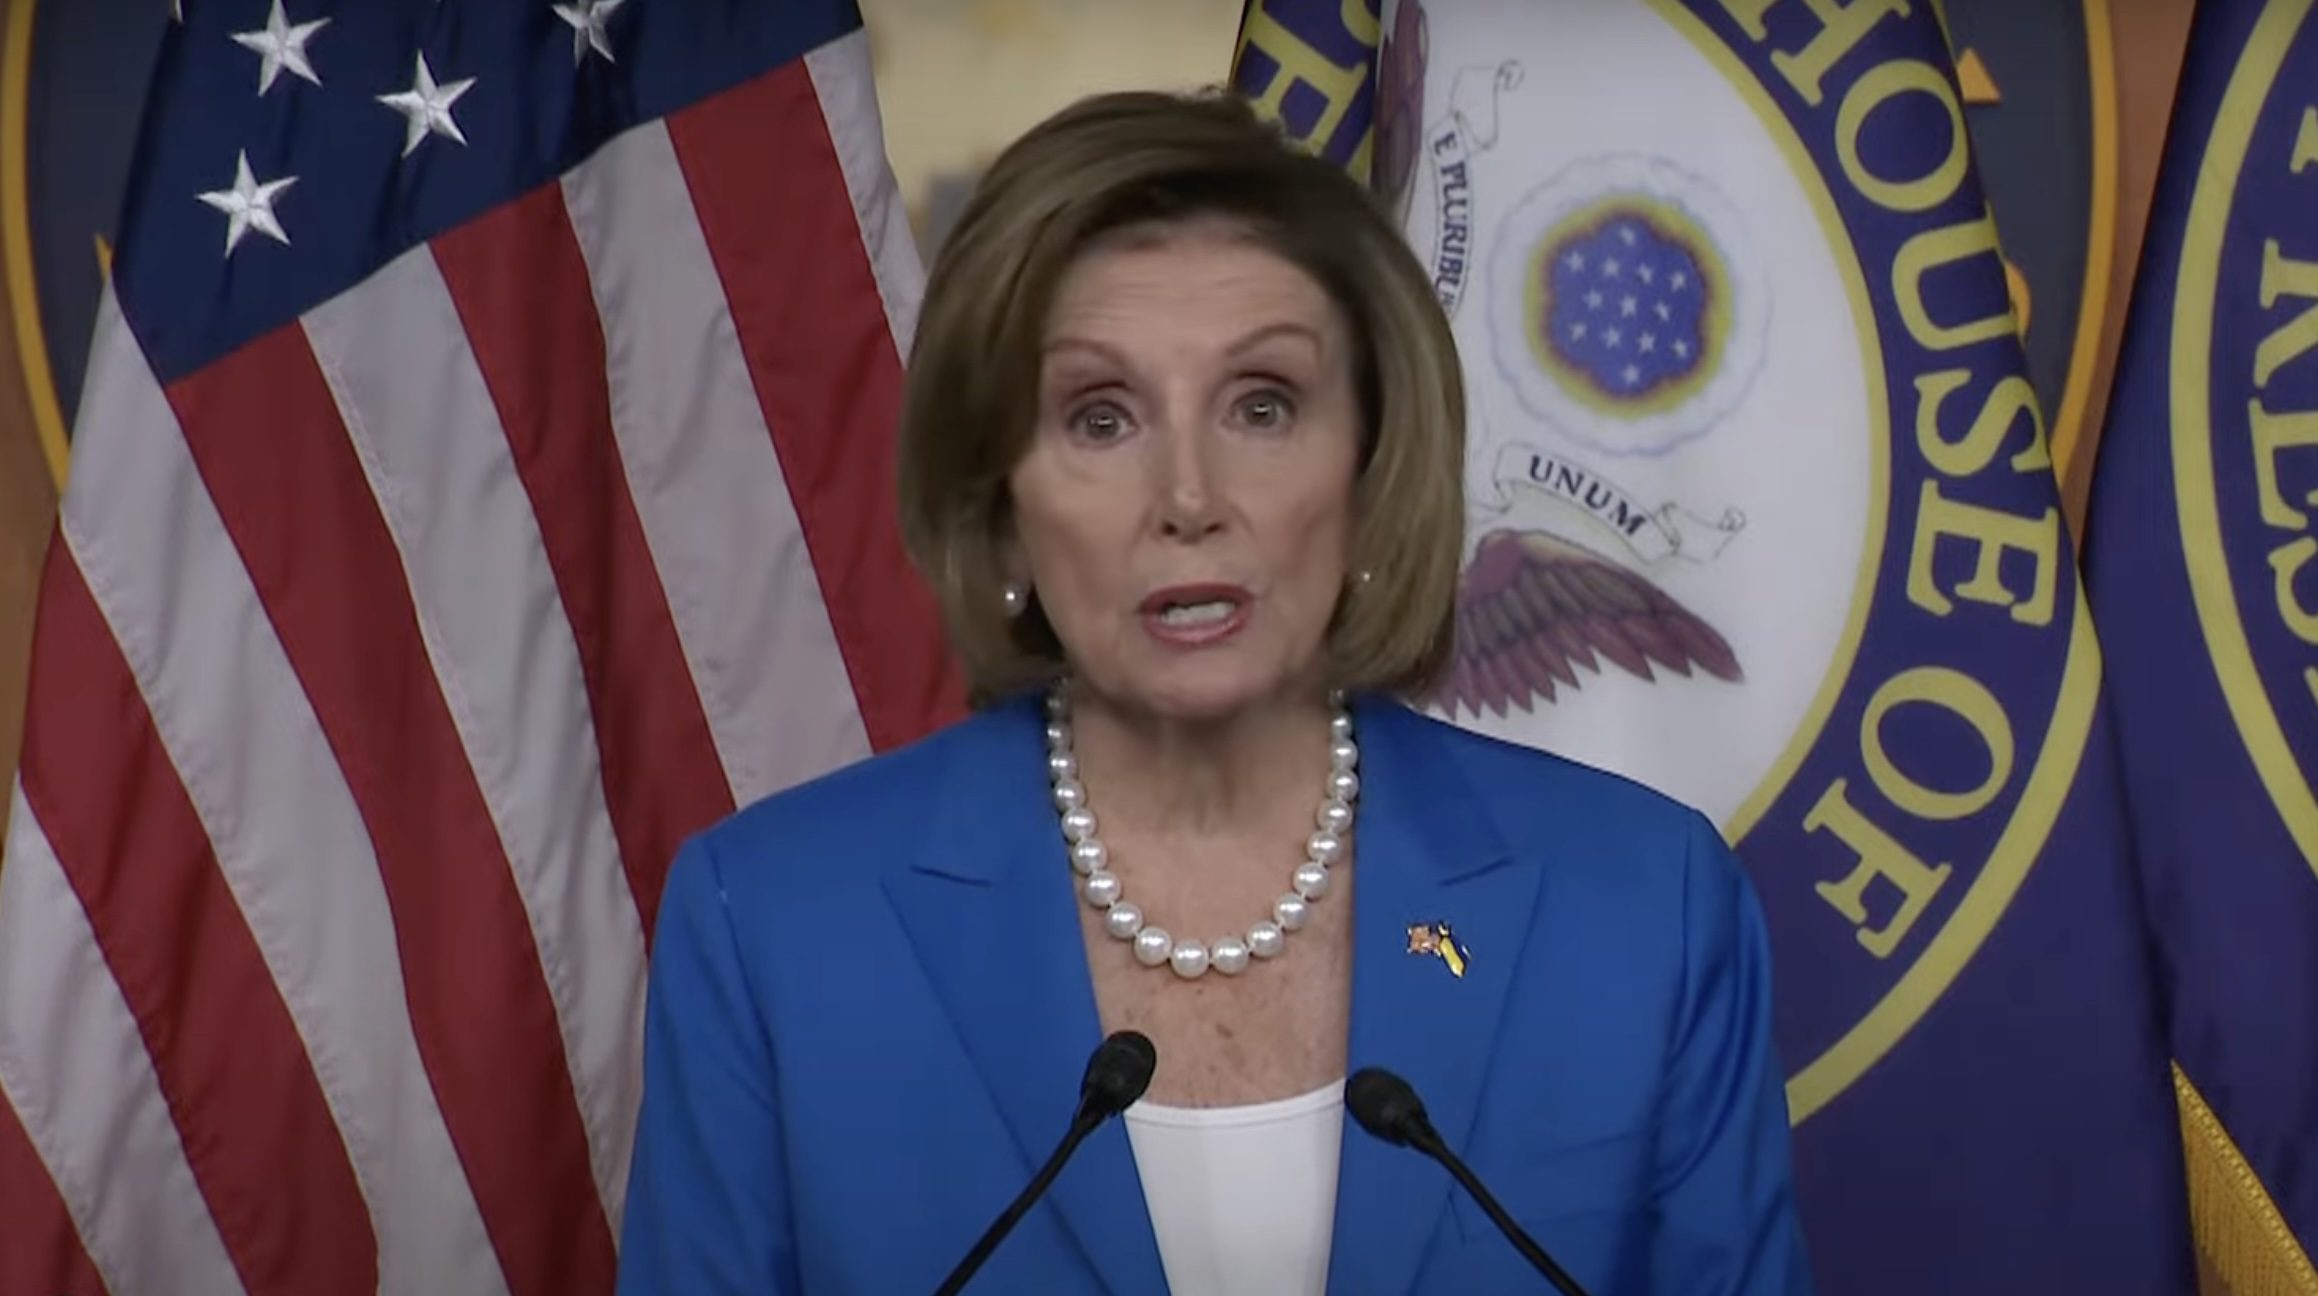 BREAKING: Acting Speaker Patrick McHenry Orders Pelosi to Vacate Her Capitol Hideaway Office by Wednesday - PELOSI FREAKS! | The Gateway Pundit | by Cristina Laila